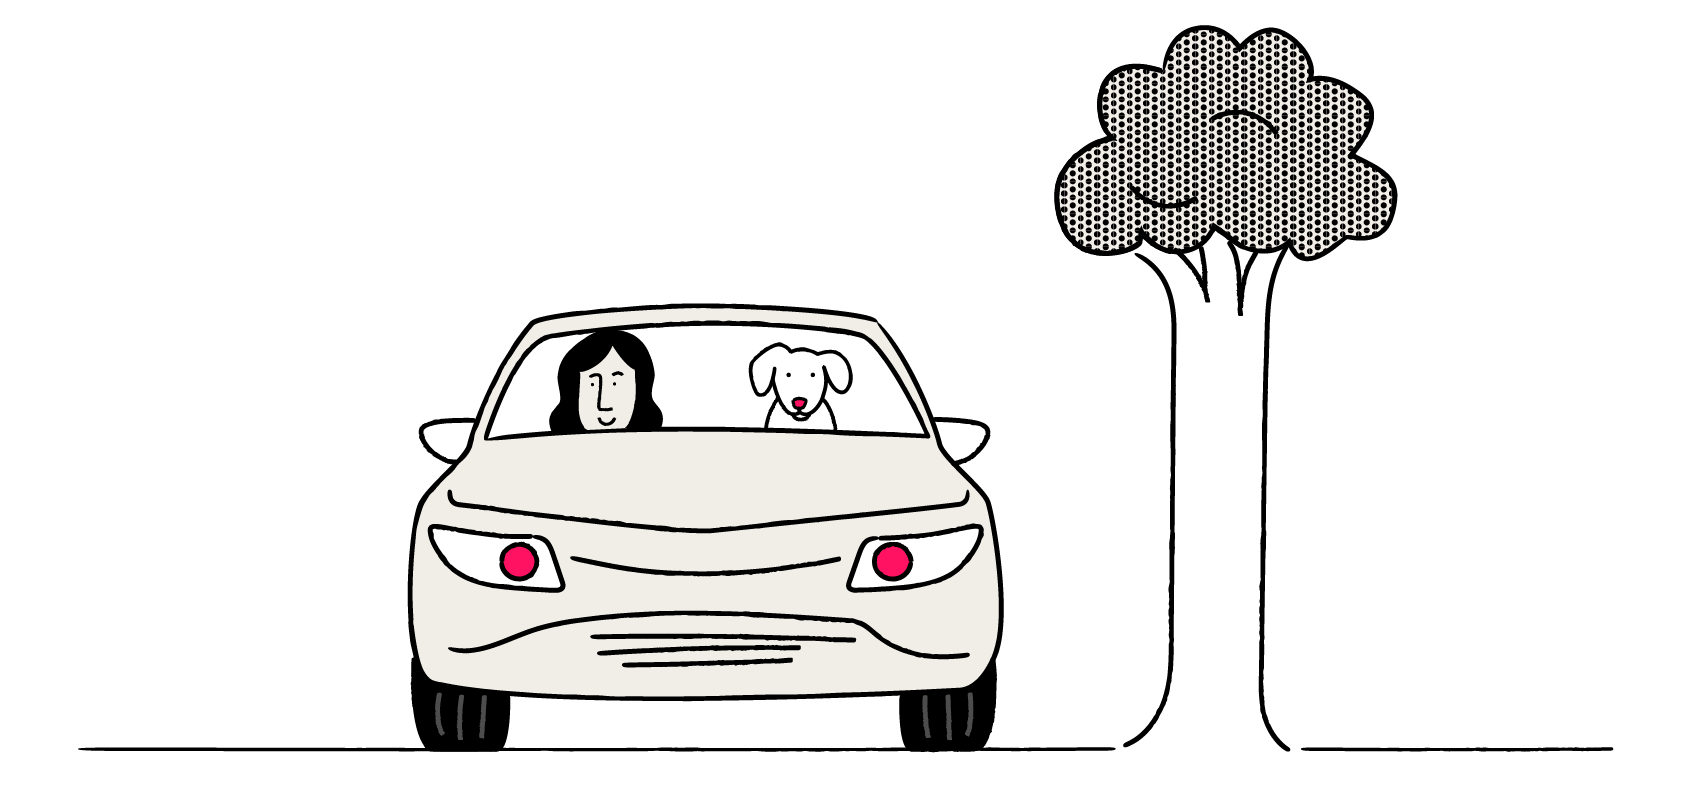 A girl and dog in her car next to a tree - Oly Novated Lease